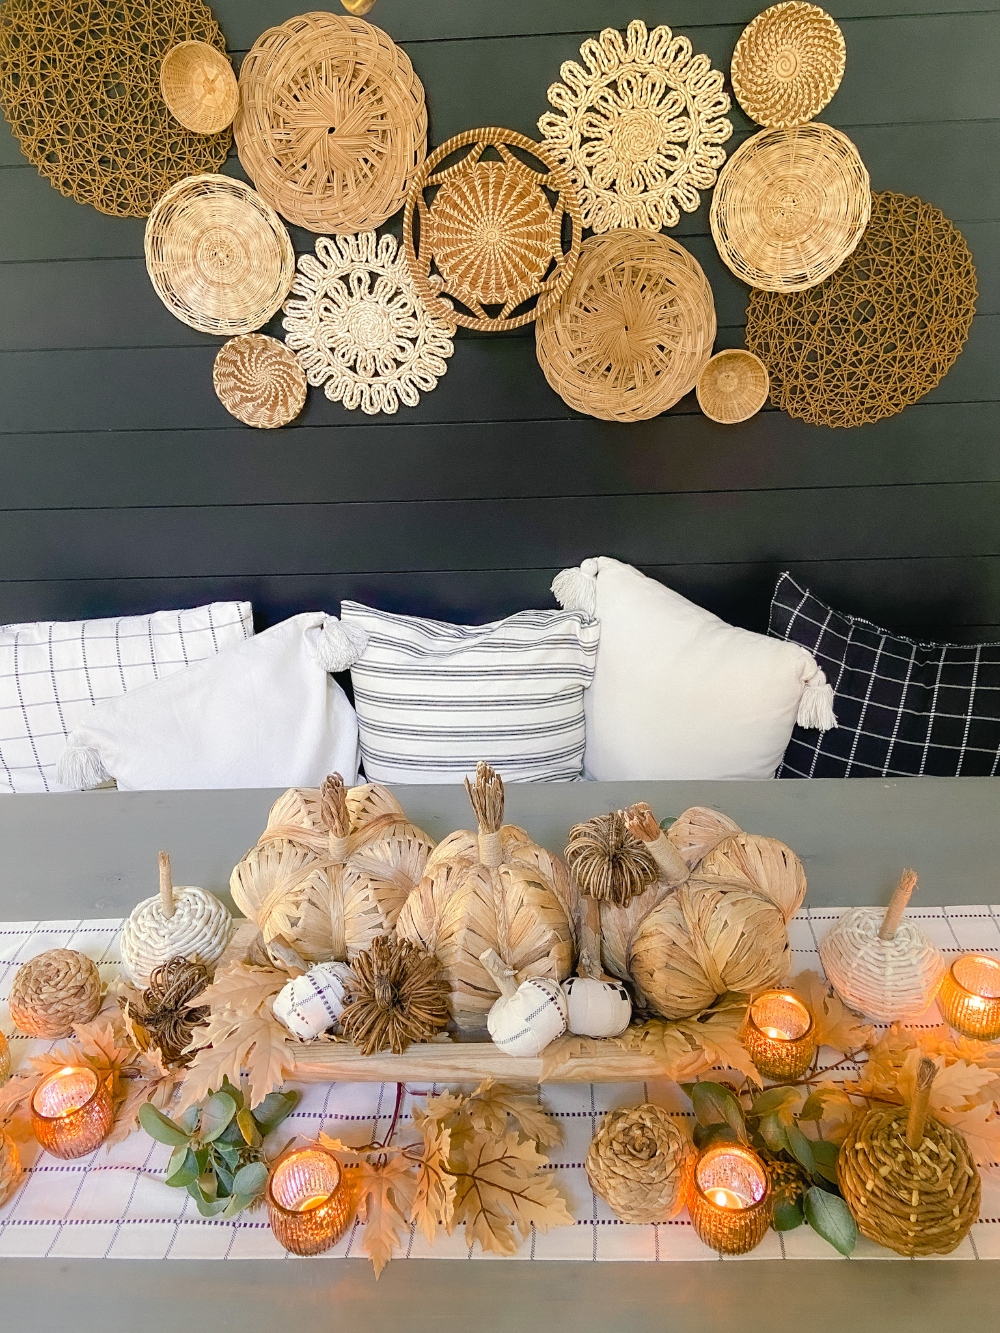 Boho Cottage Fall Tablescape. Create a warm and inviting table by making a DIY table runner, pillows and a beautiful footed bowl centerpiece filled with textured, fabric-covered pumpkins and leaves.